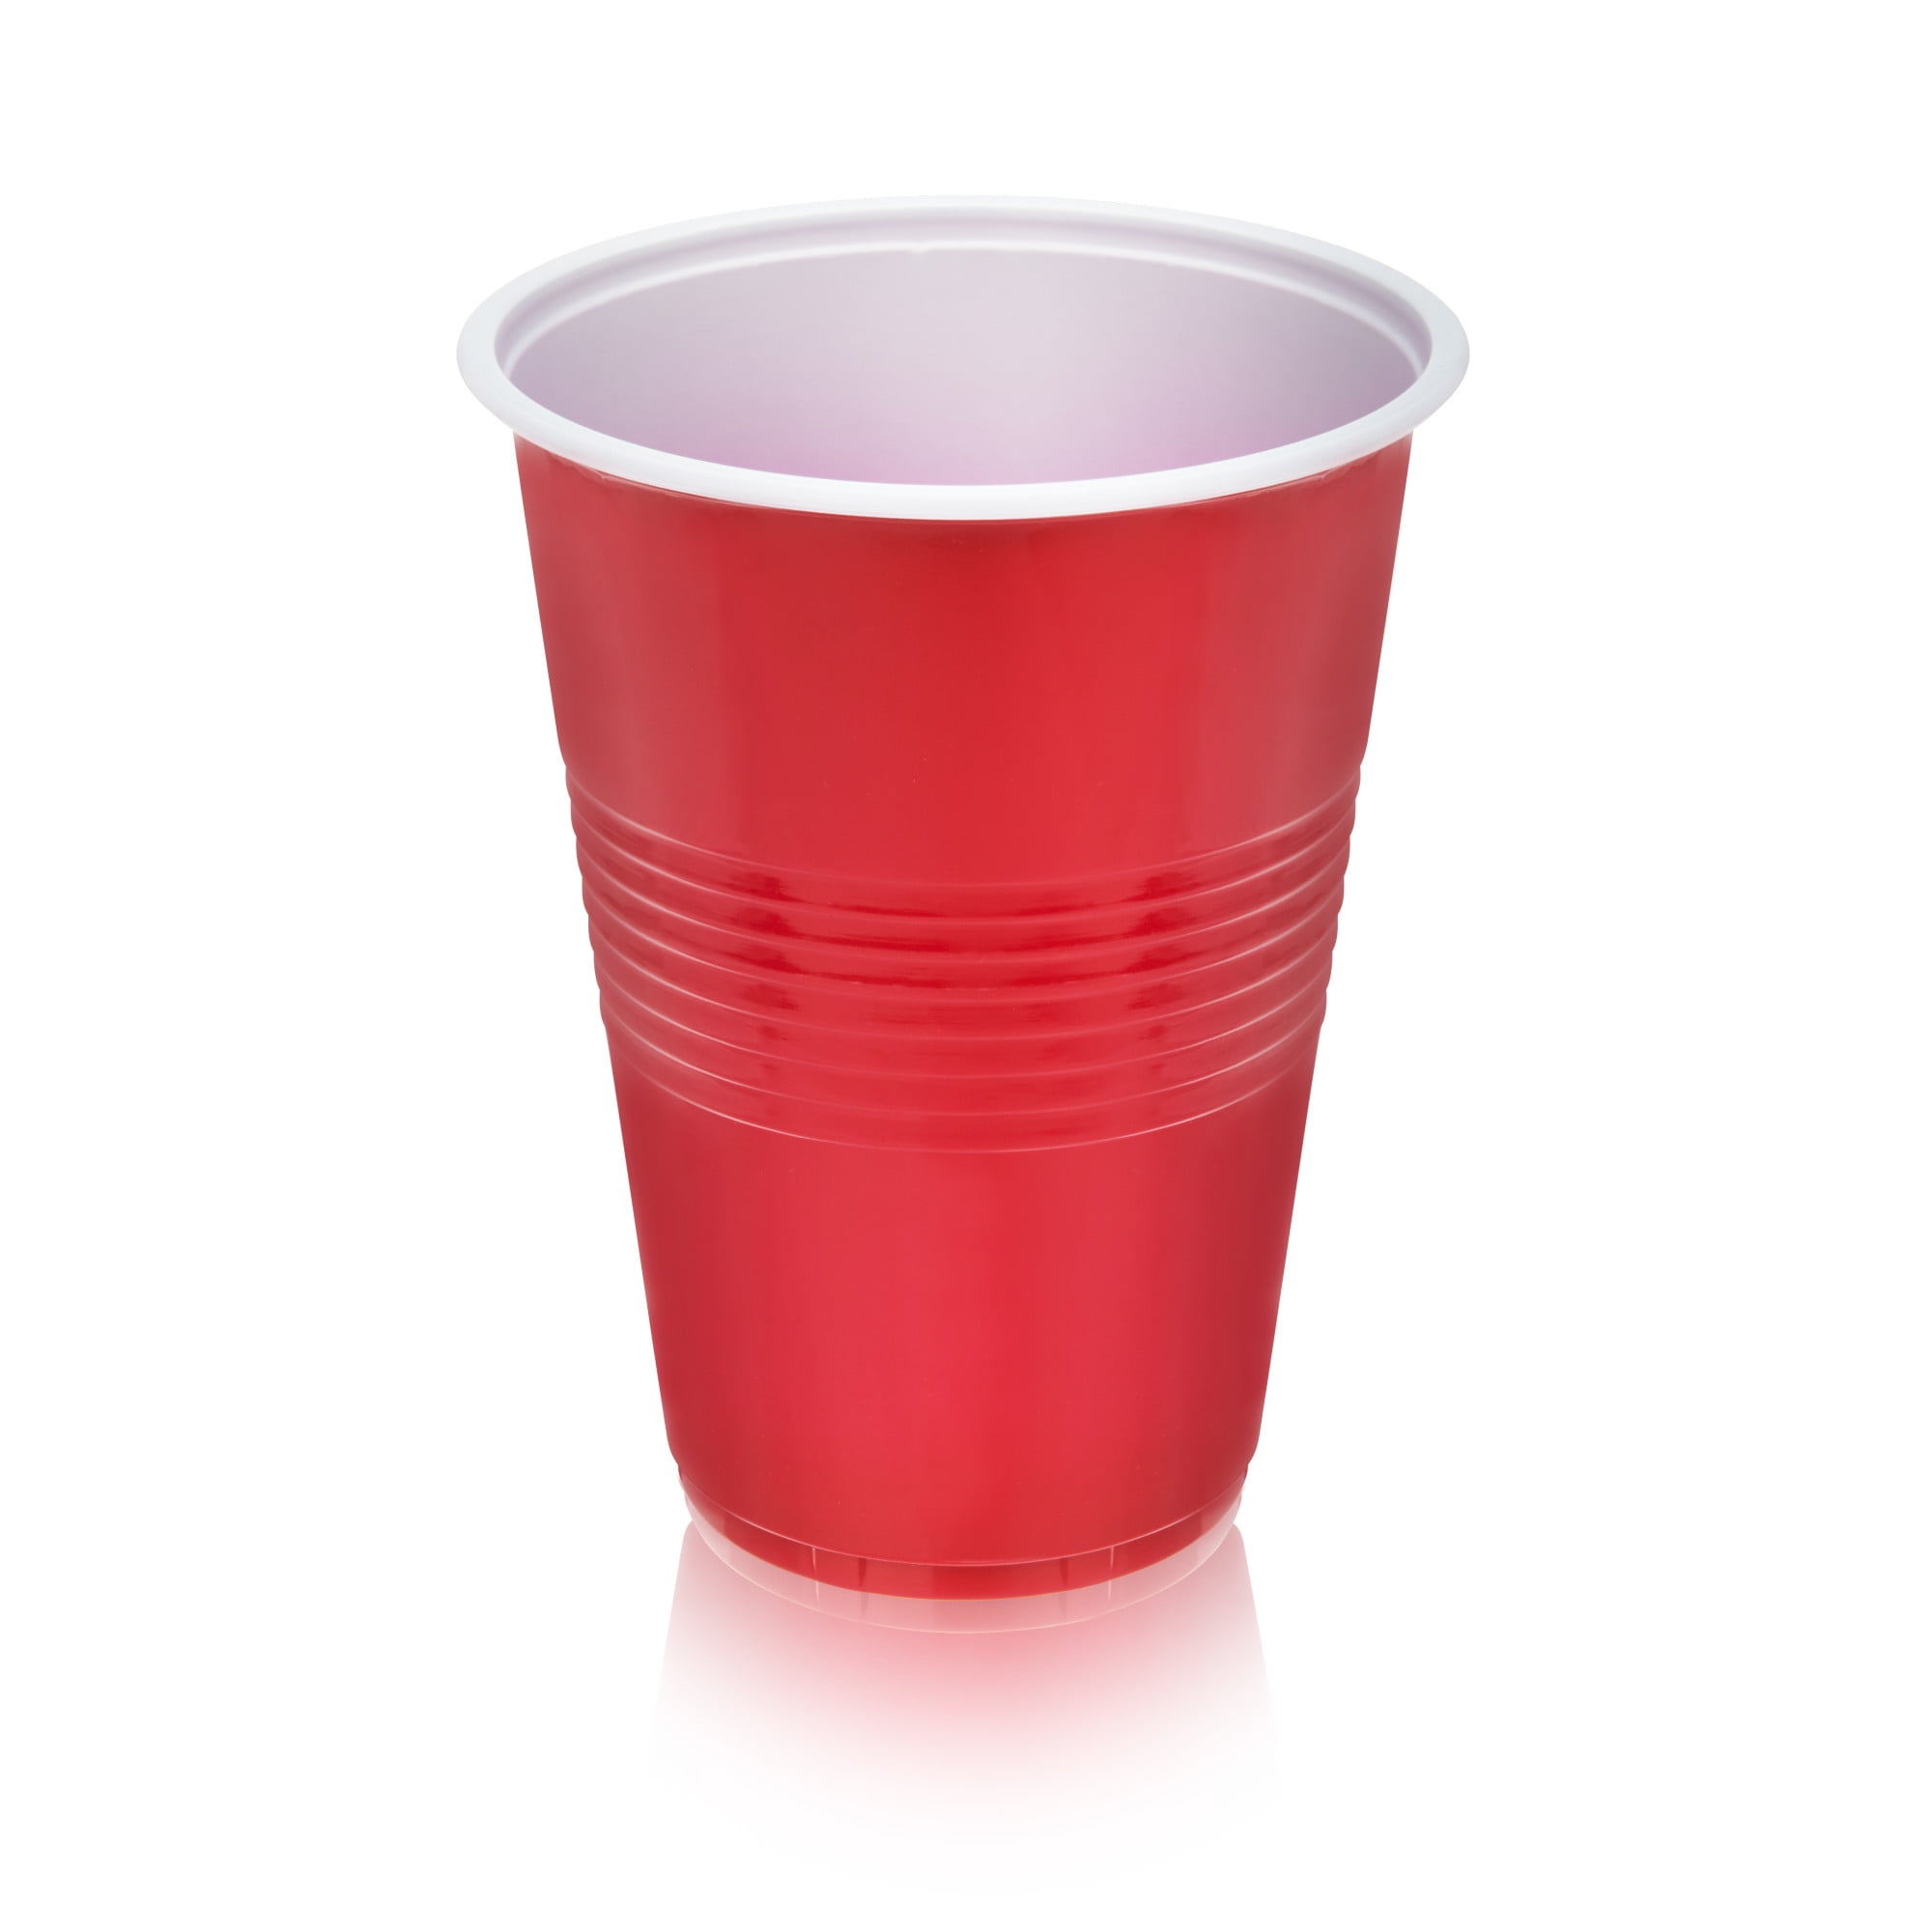 True Red Party Cups, disposable Cups for Parties, Beer Pong Cup, Perfect  for Outdoor Drinking Games, Drink Tumblers, set of 24, 16oz, Red 